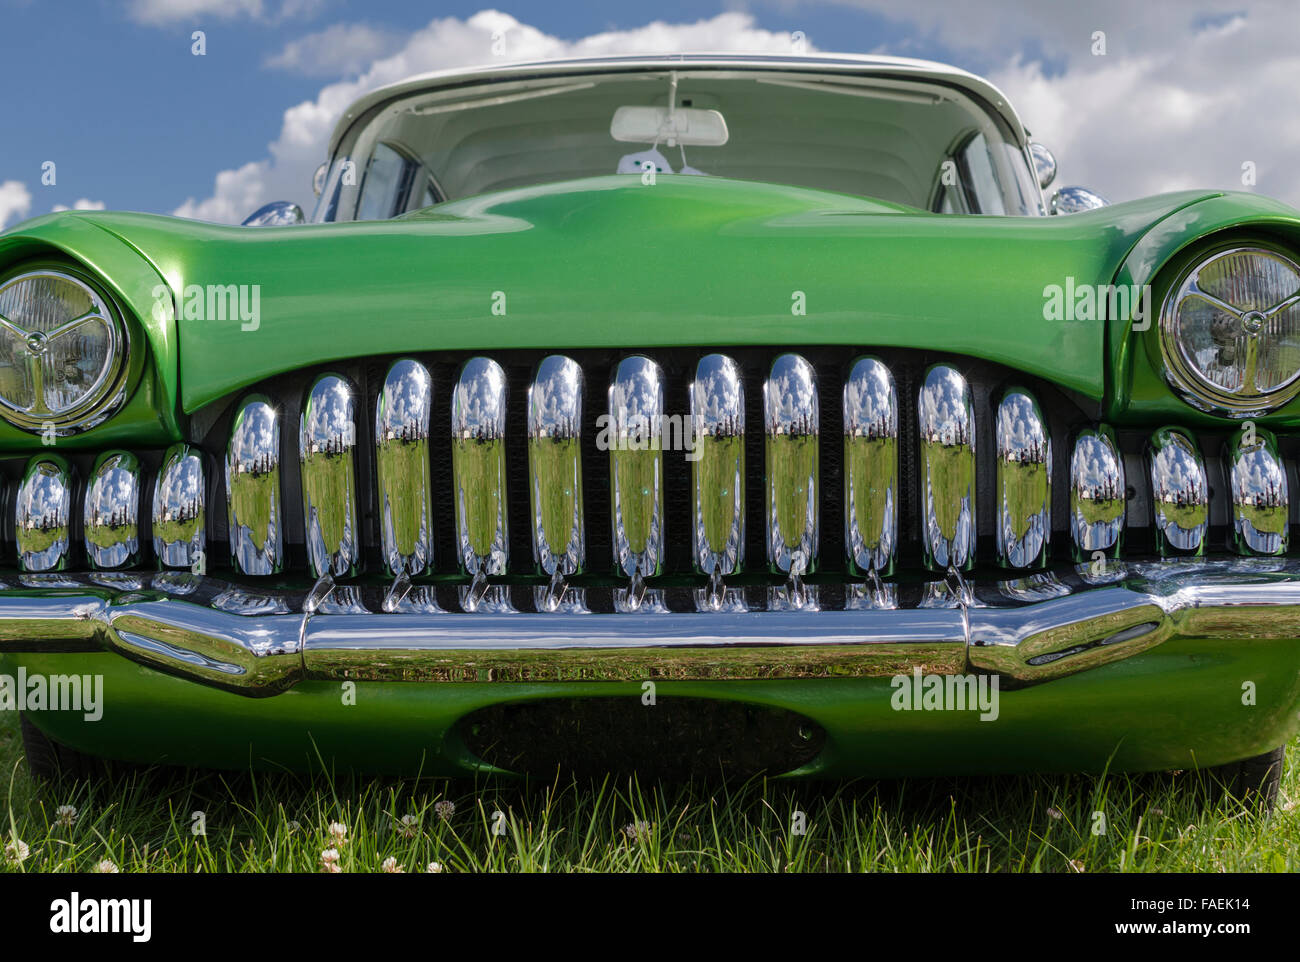 What Antique Car Had A Crown On The Front Grill - Antique Cars Blog